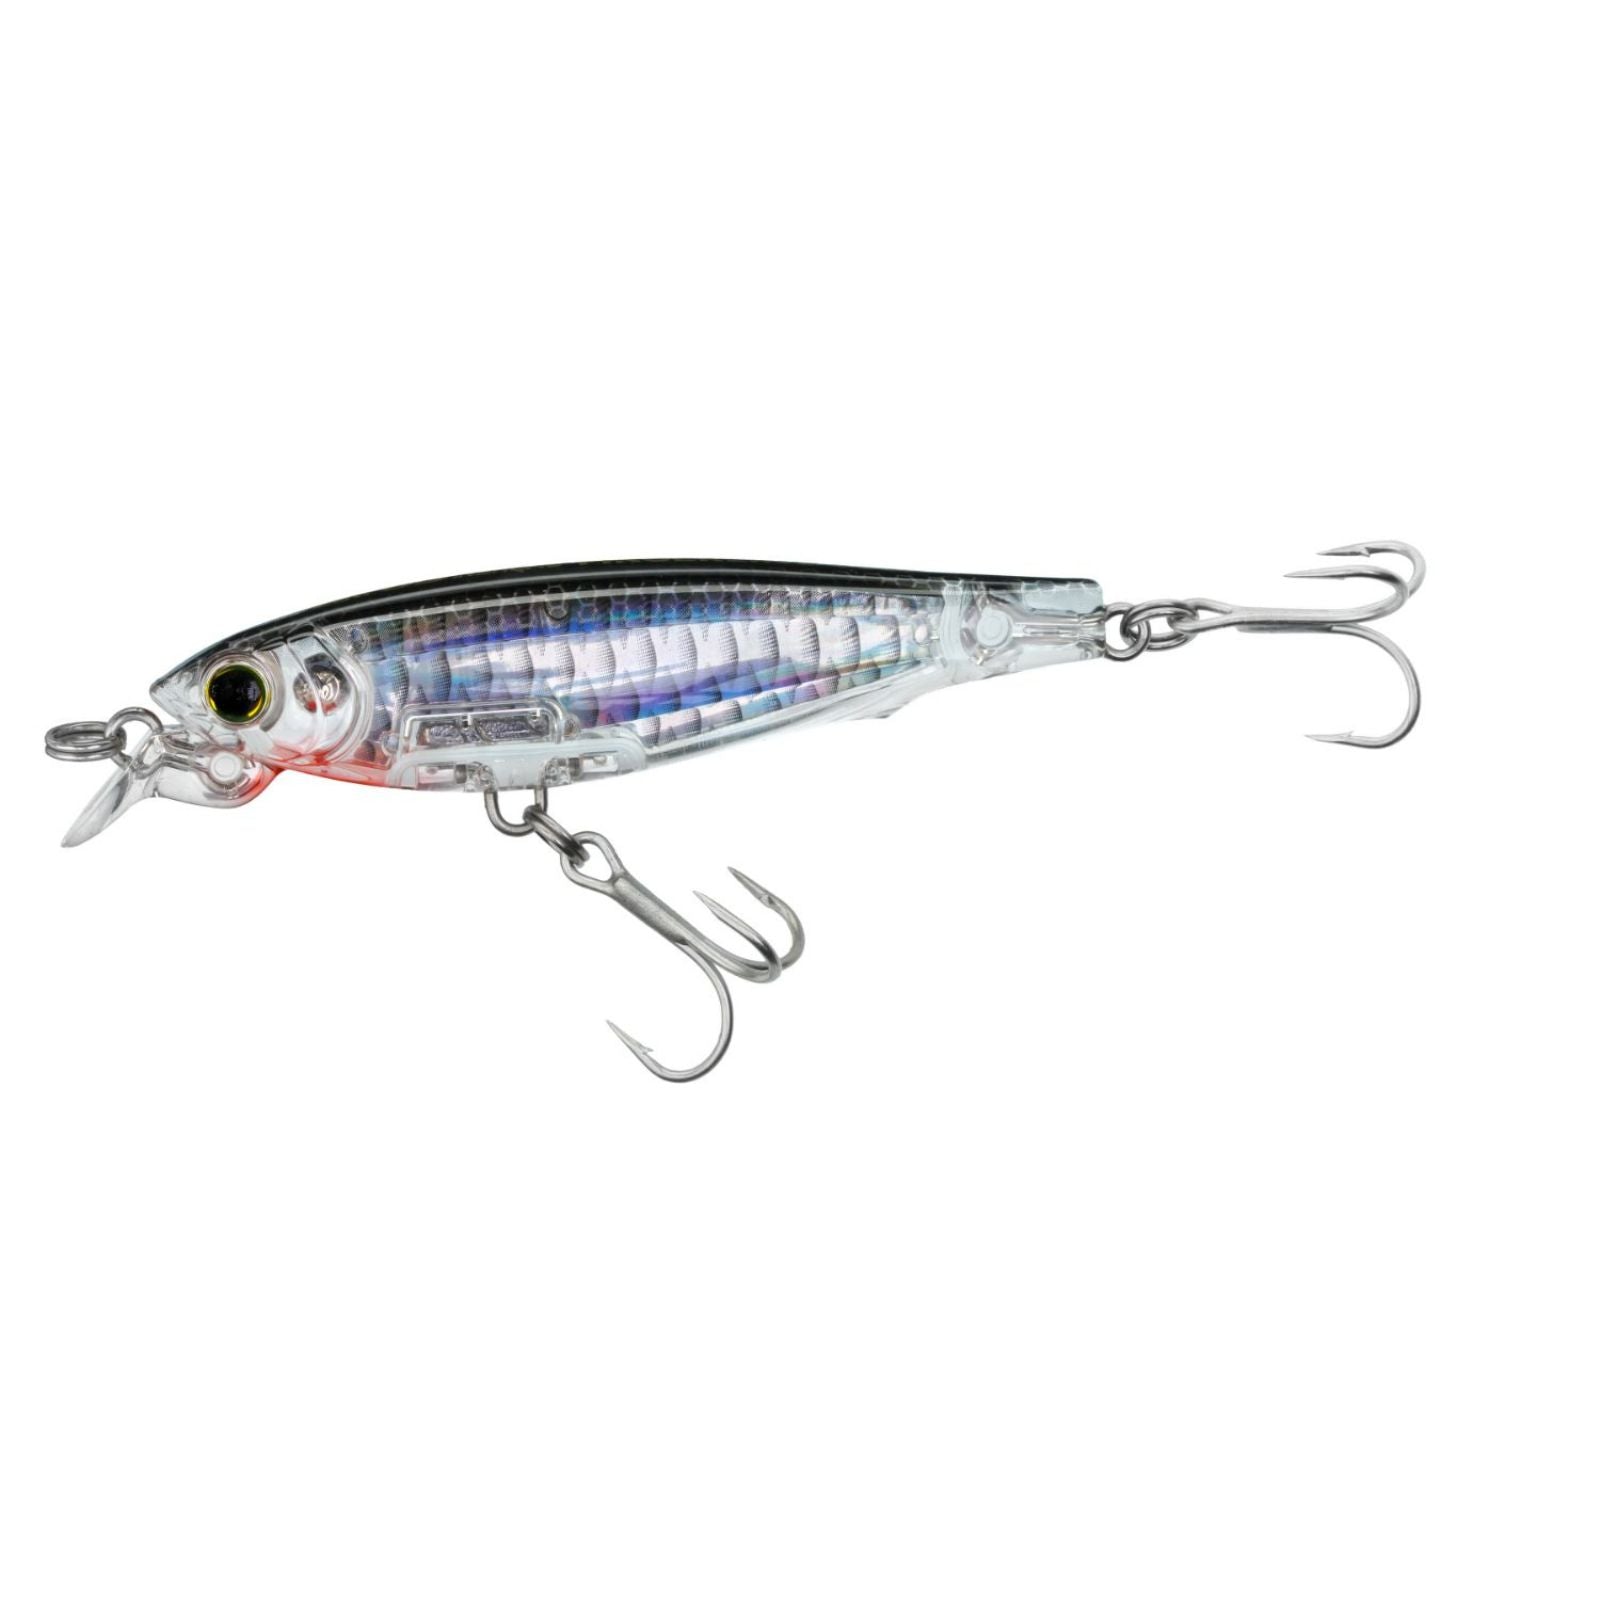 Silver Black 70mm 2.75inch Yo-Zuri 3D Inshore Fingerling Lures from Fish On  Outlet